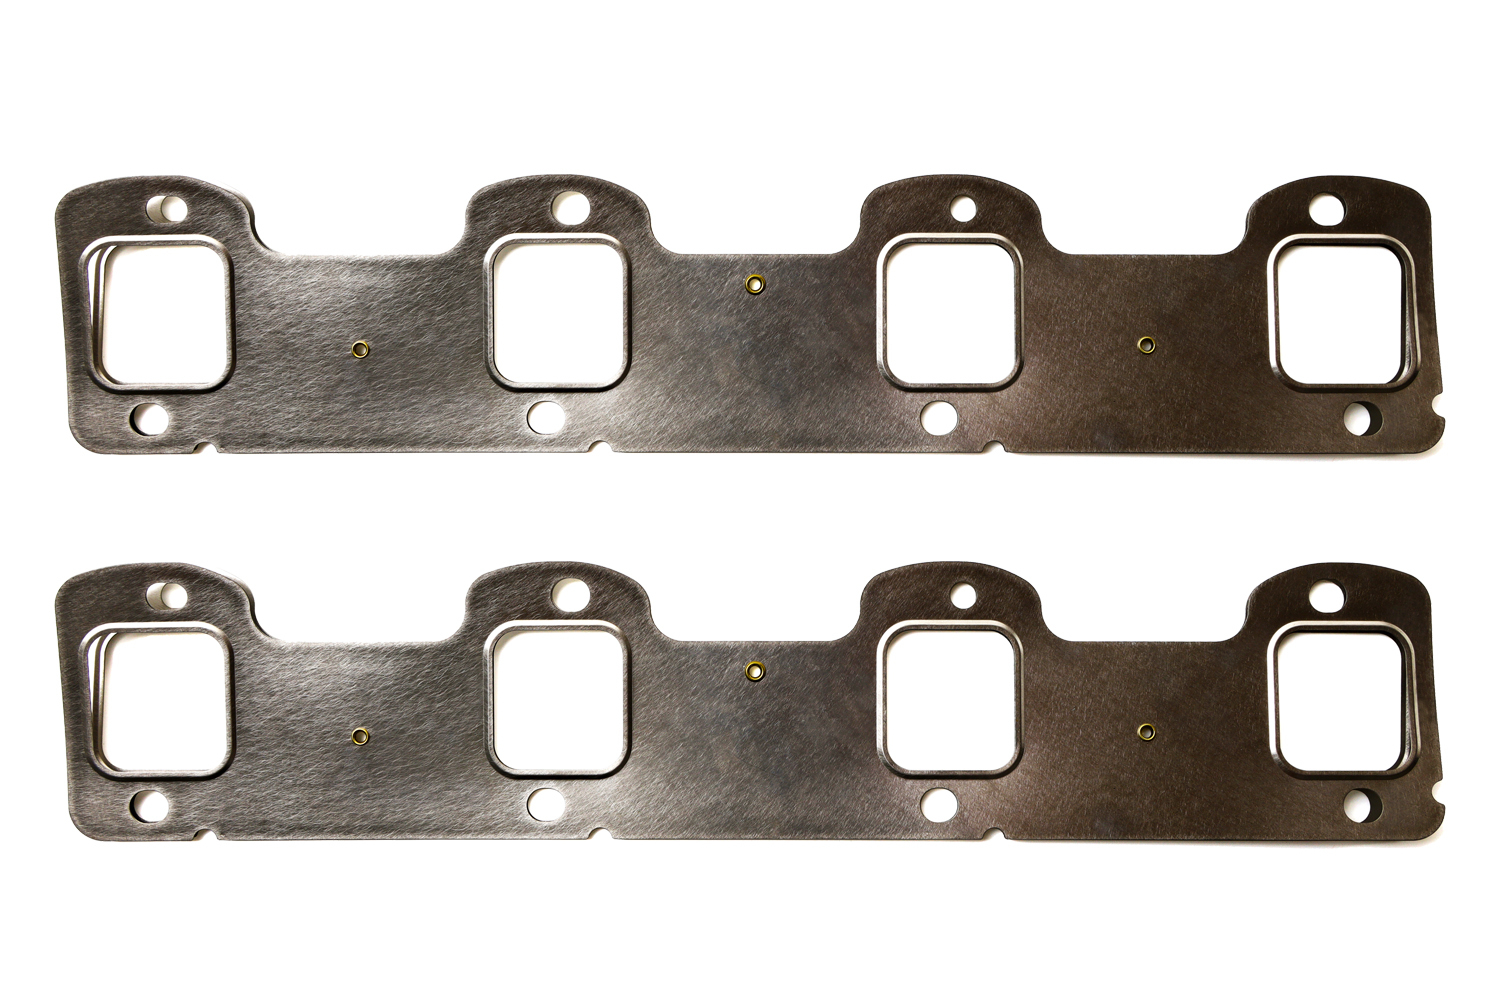 Cometic Gaskets C15487-030 - Exhaust Manifold / Header Gasket, 1.632 x 1.496 in Rectangle Port, Multi-Layer Steel, Ford Powerstroke, Pair